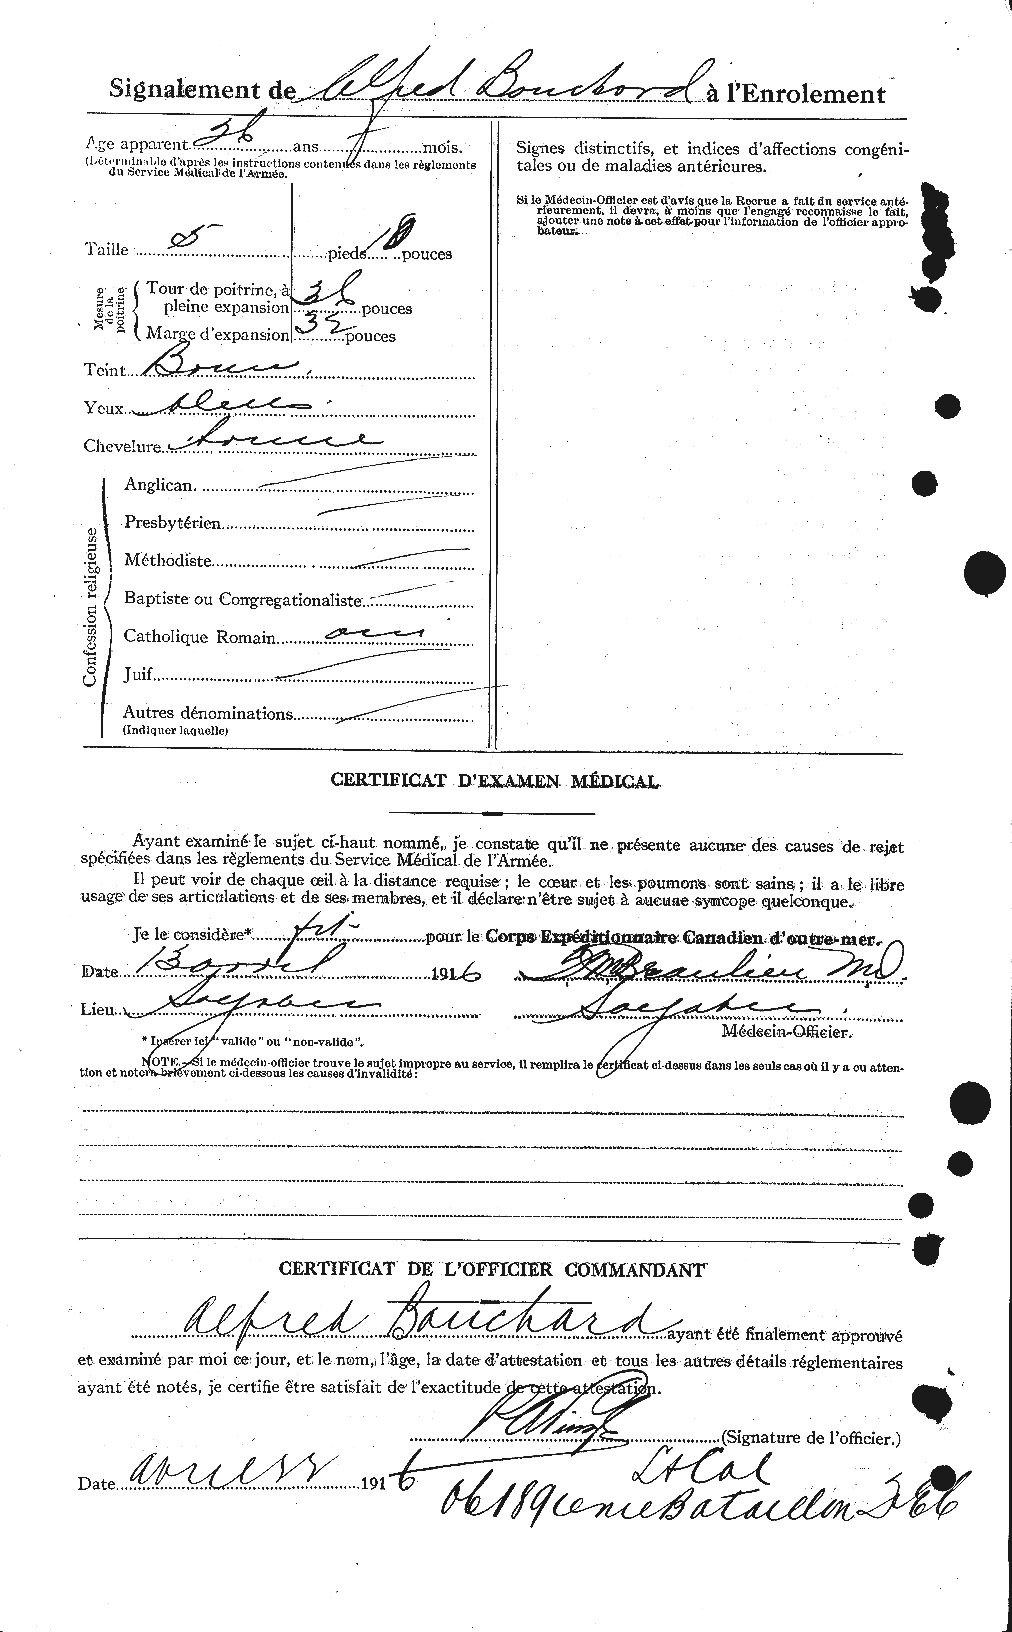 Personnel Records of the First World War - CEF 252183b